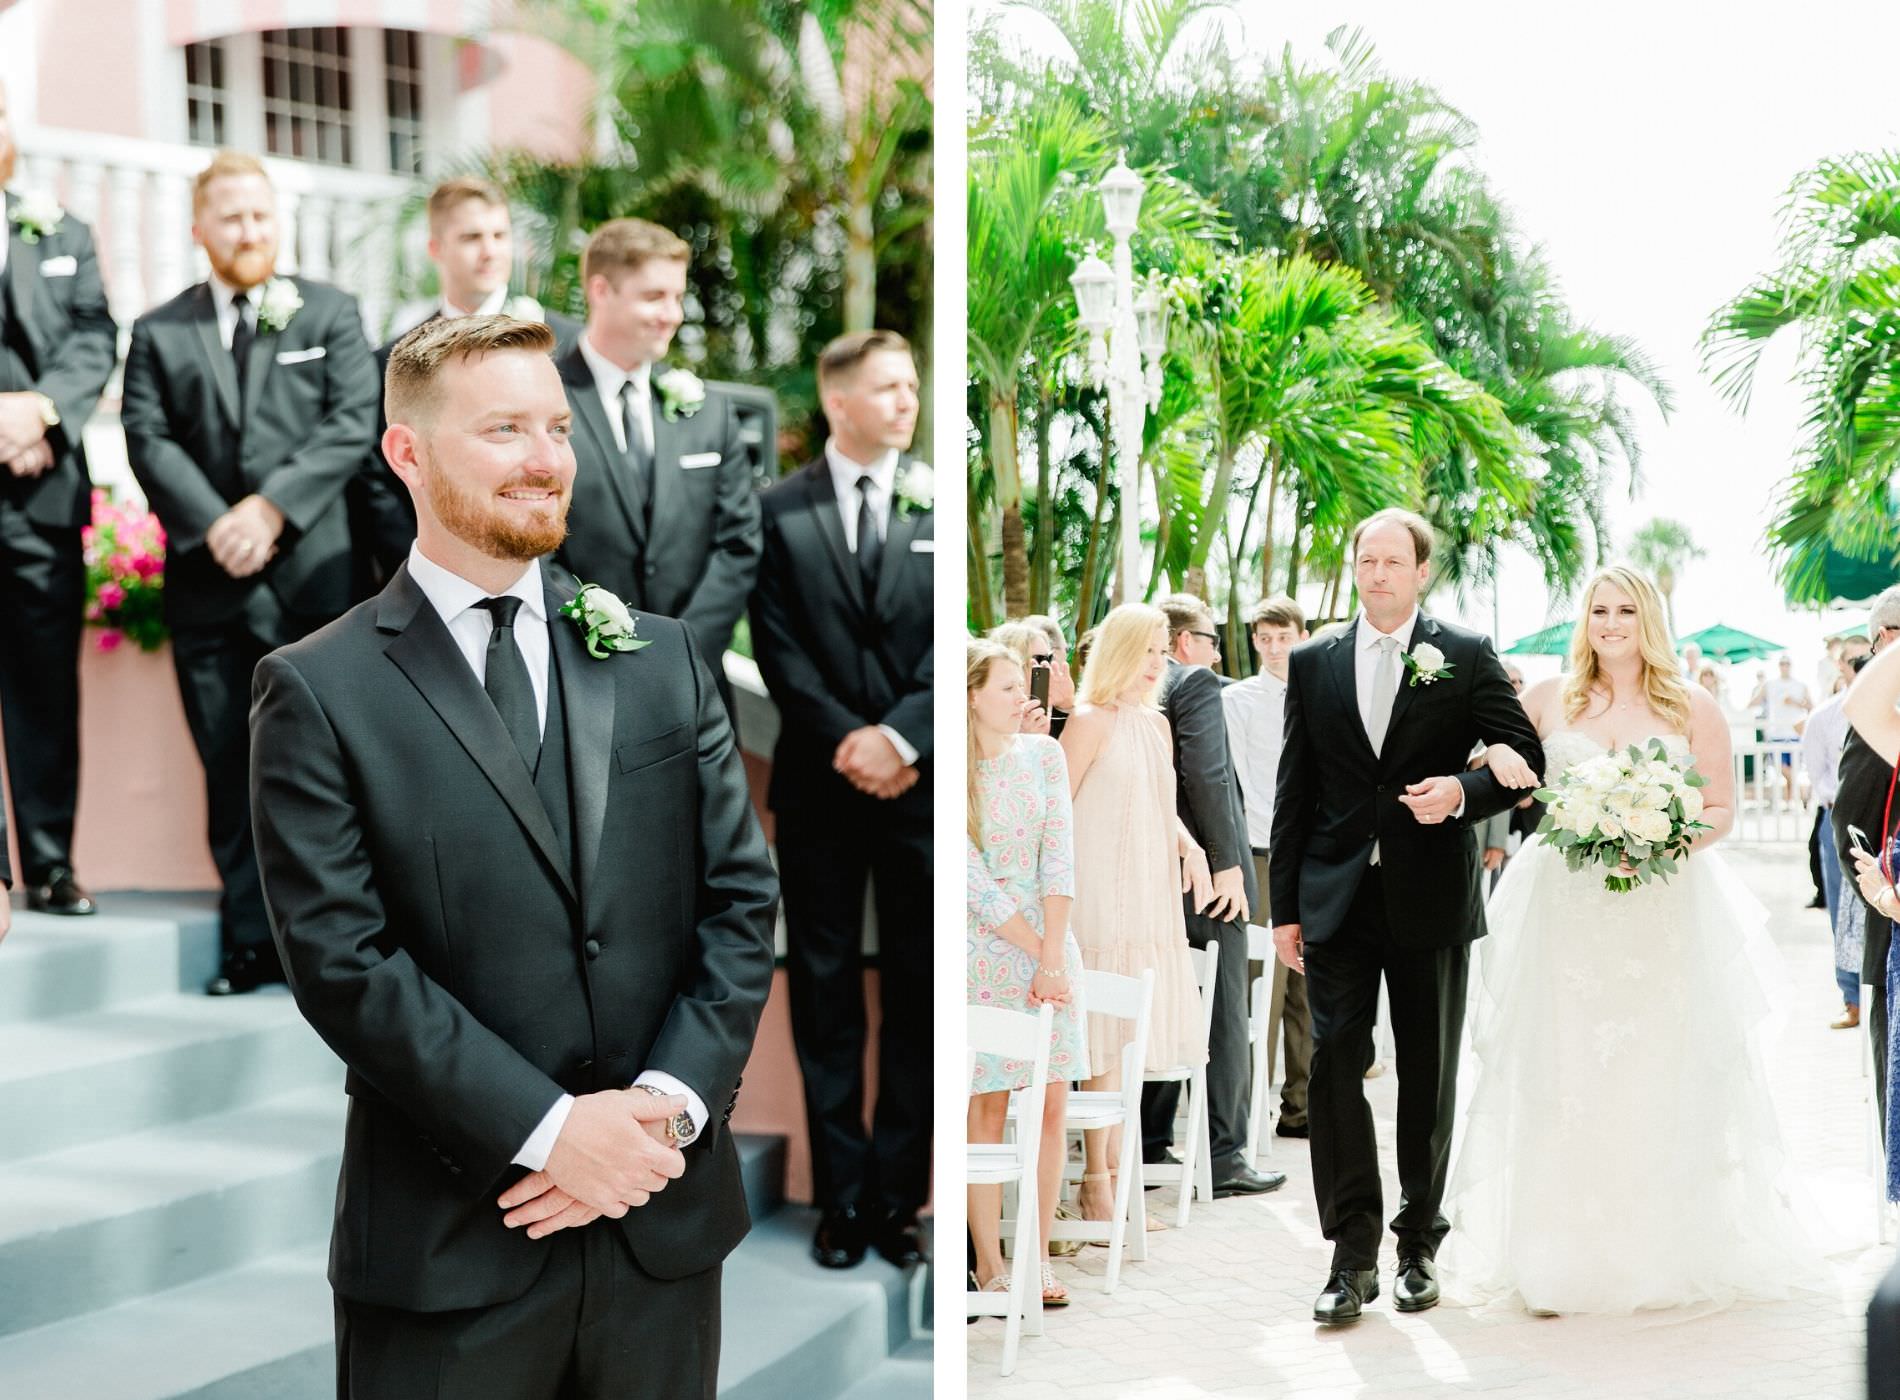 St. Pete Beach Wedding Venue The Don Cesar | Staircase Wedding Ceremony | Bride Walking Down the Aisle with Her Father | Groom and Groomsmen Wearing Classic Black Suit Tux